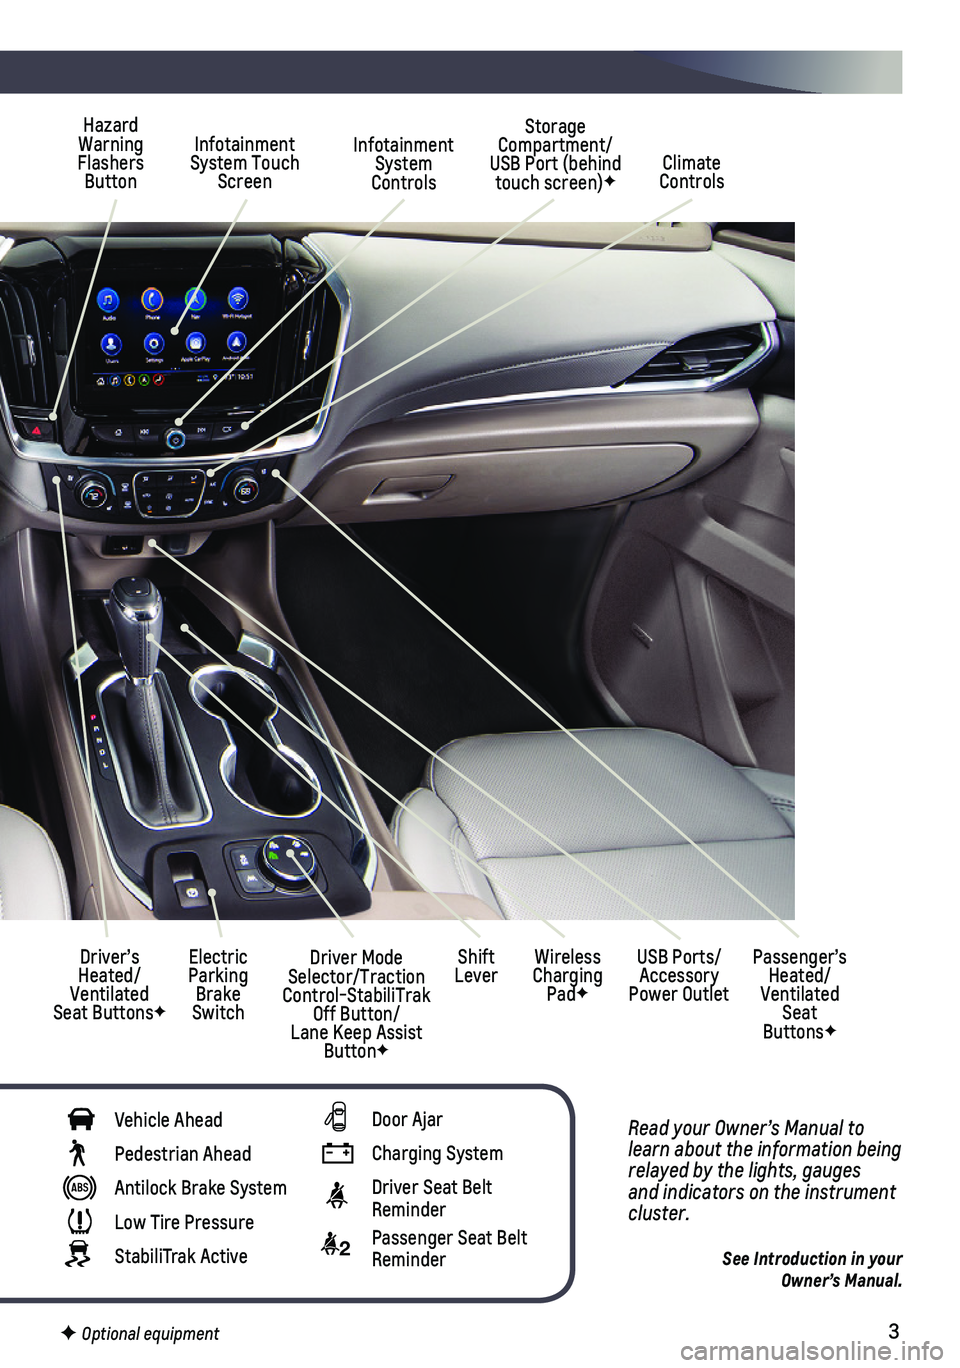 CHEVROLET TRAVERSE 2021  Get To Know Guide 3
Read your Owner’s Manual to learn about the information being relayed by the lights, gauges and indicators on the instrument cluster.
See Introduction in your  Owner’s Manual.
Infotainment Syste